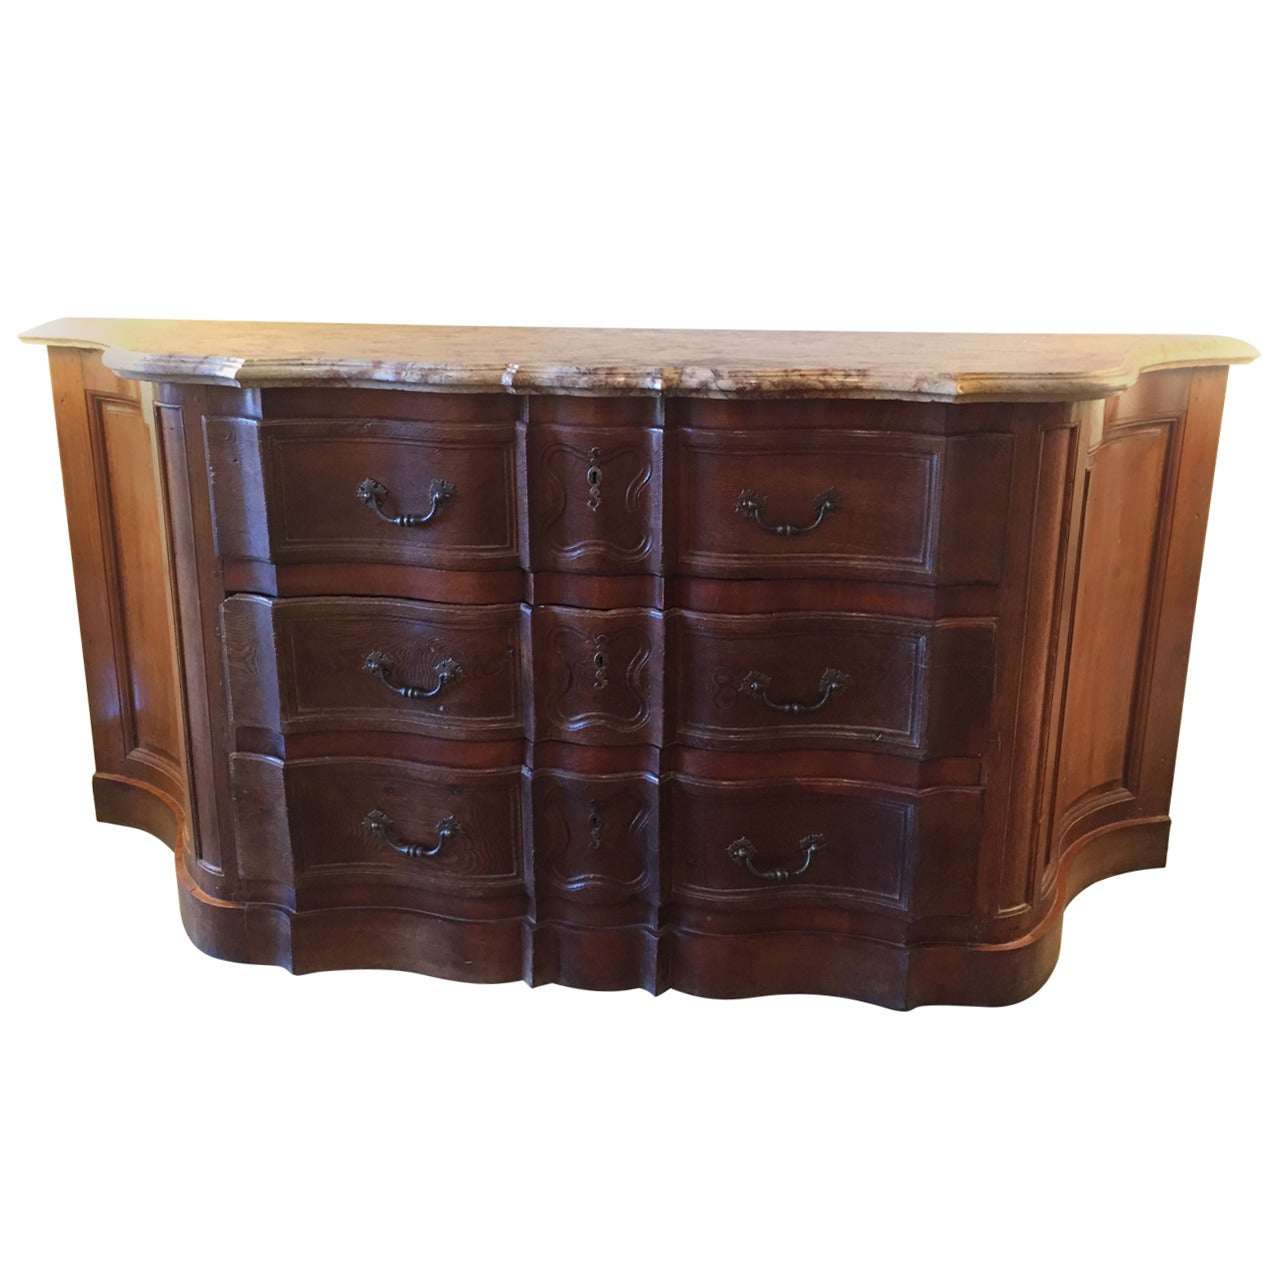 18th Century French Regence Commode with Marble Top from the Lyonnaise Region